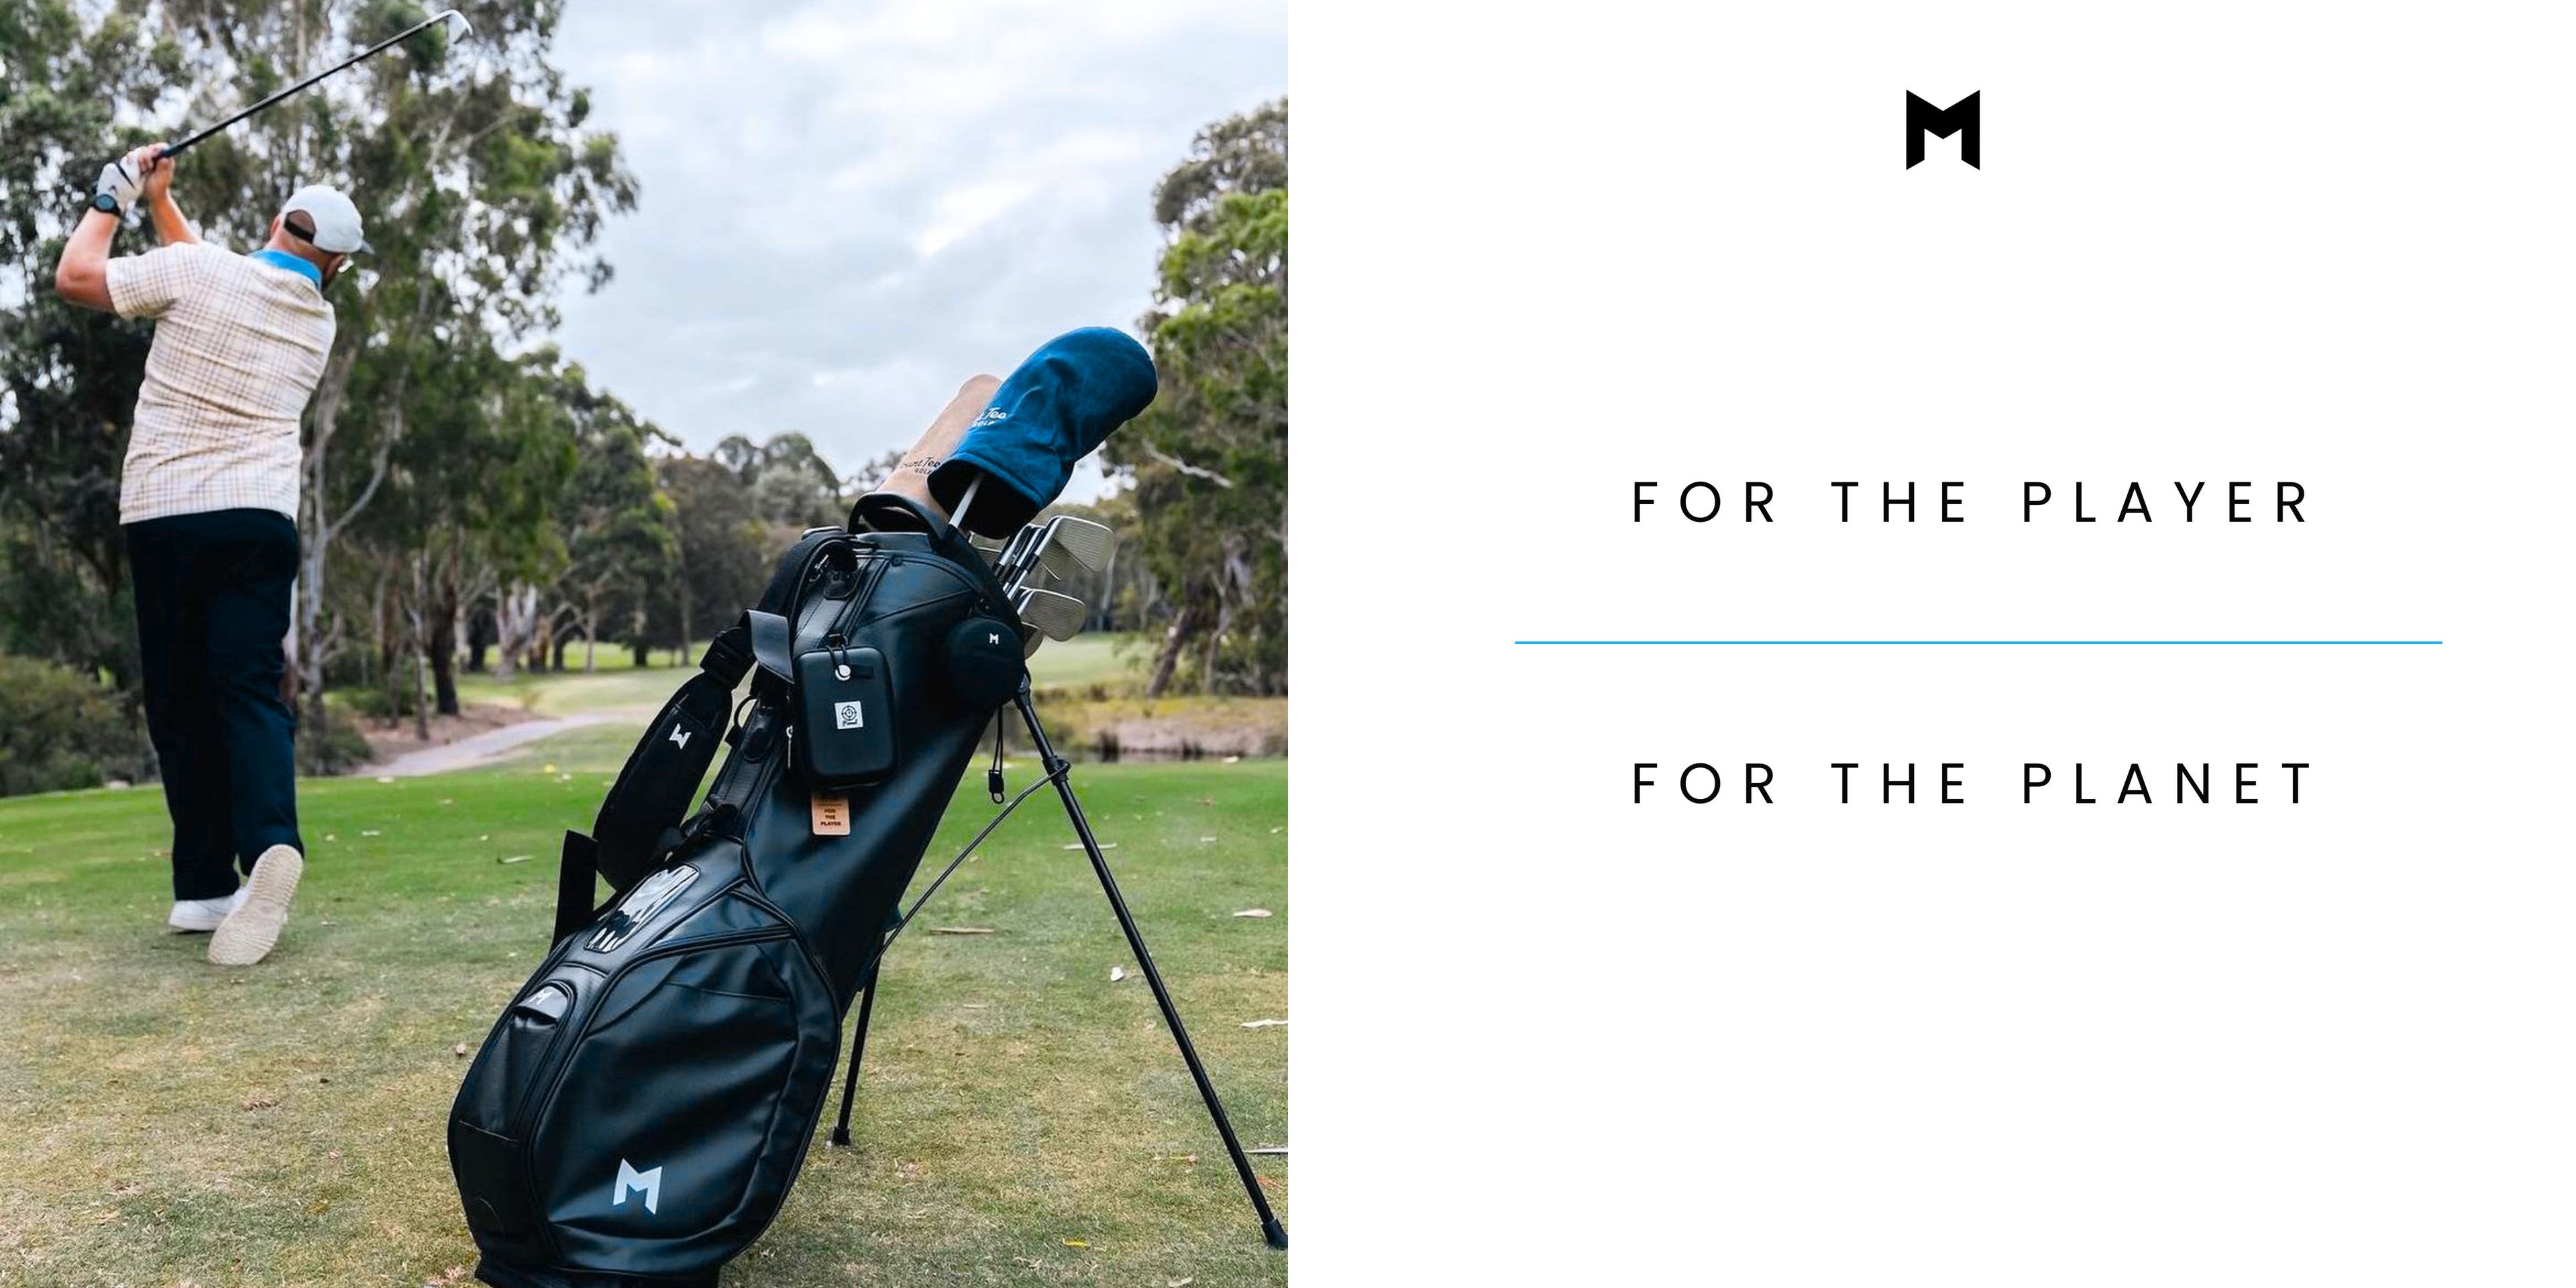 Our team teeing off with a black MR1 eco golf bag.